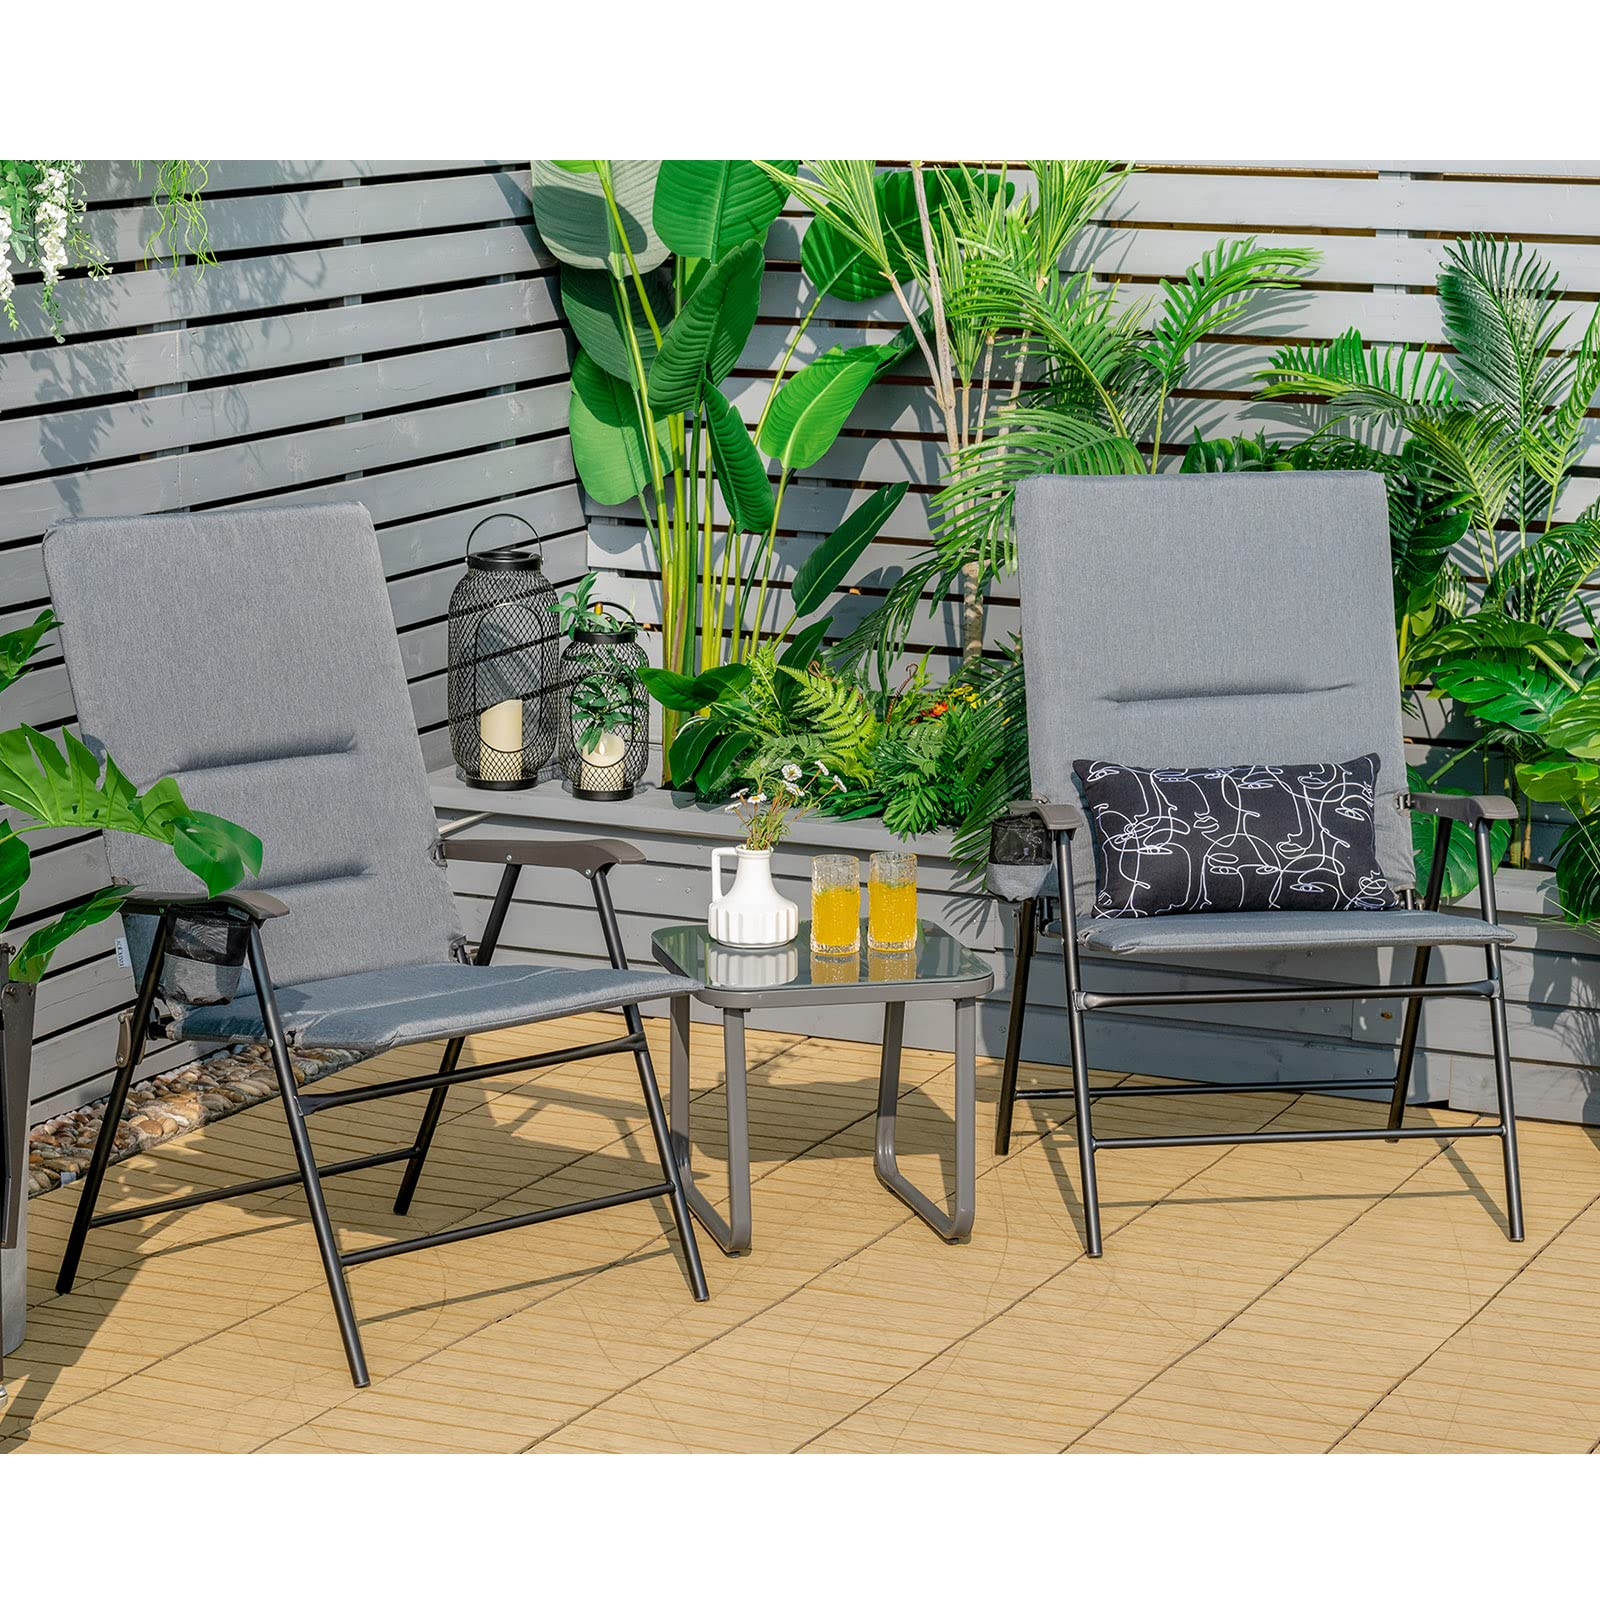 Giantex Folding Patio Chairs, Outdoor Lawn Chairs